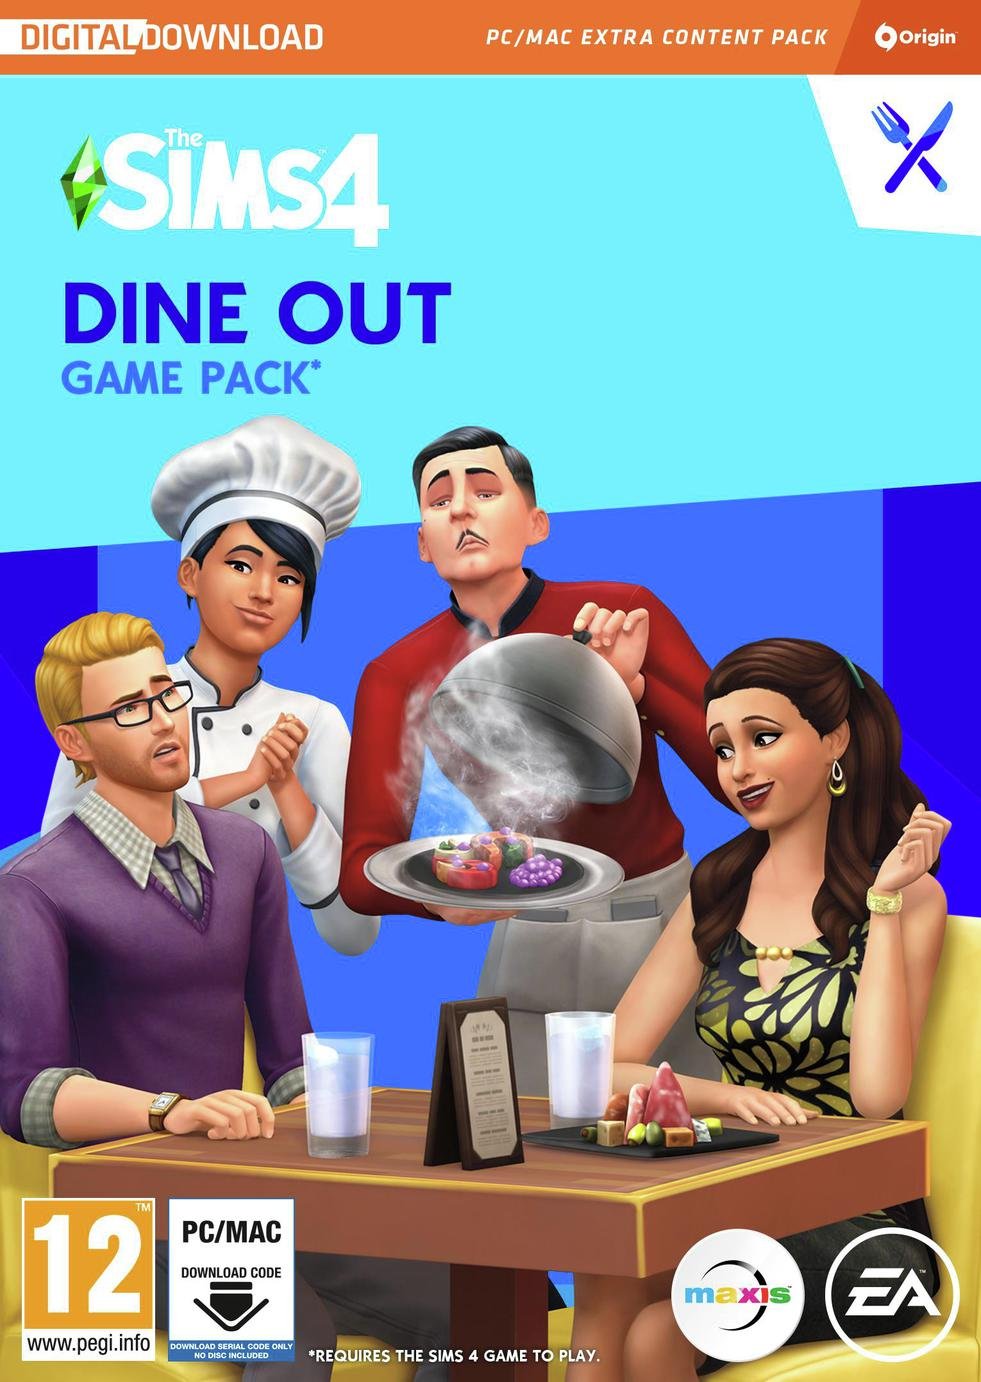 The Sims 4 Dine Out Game Pack PC Game